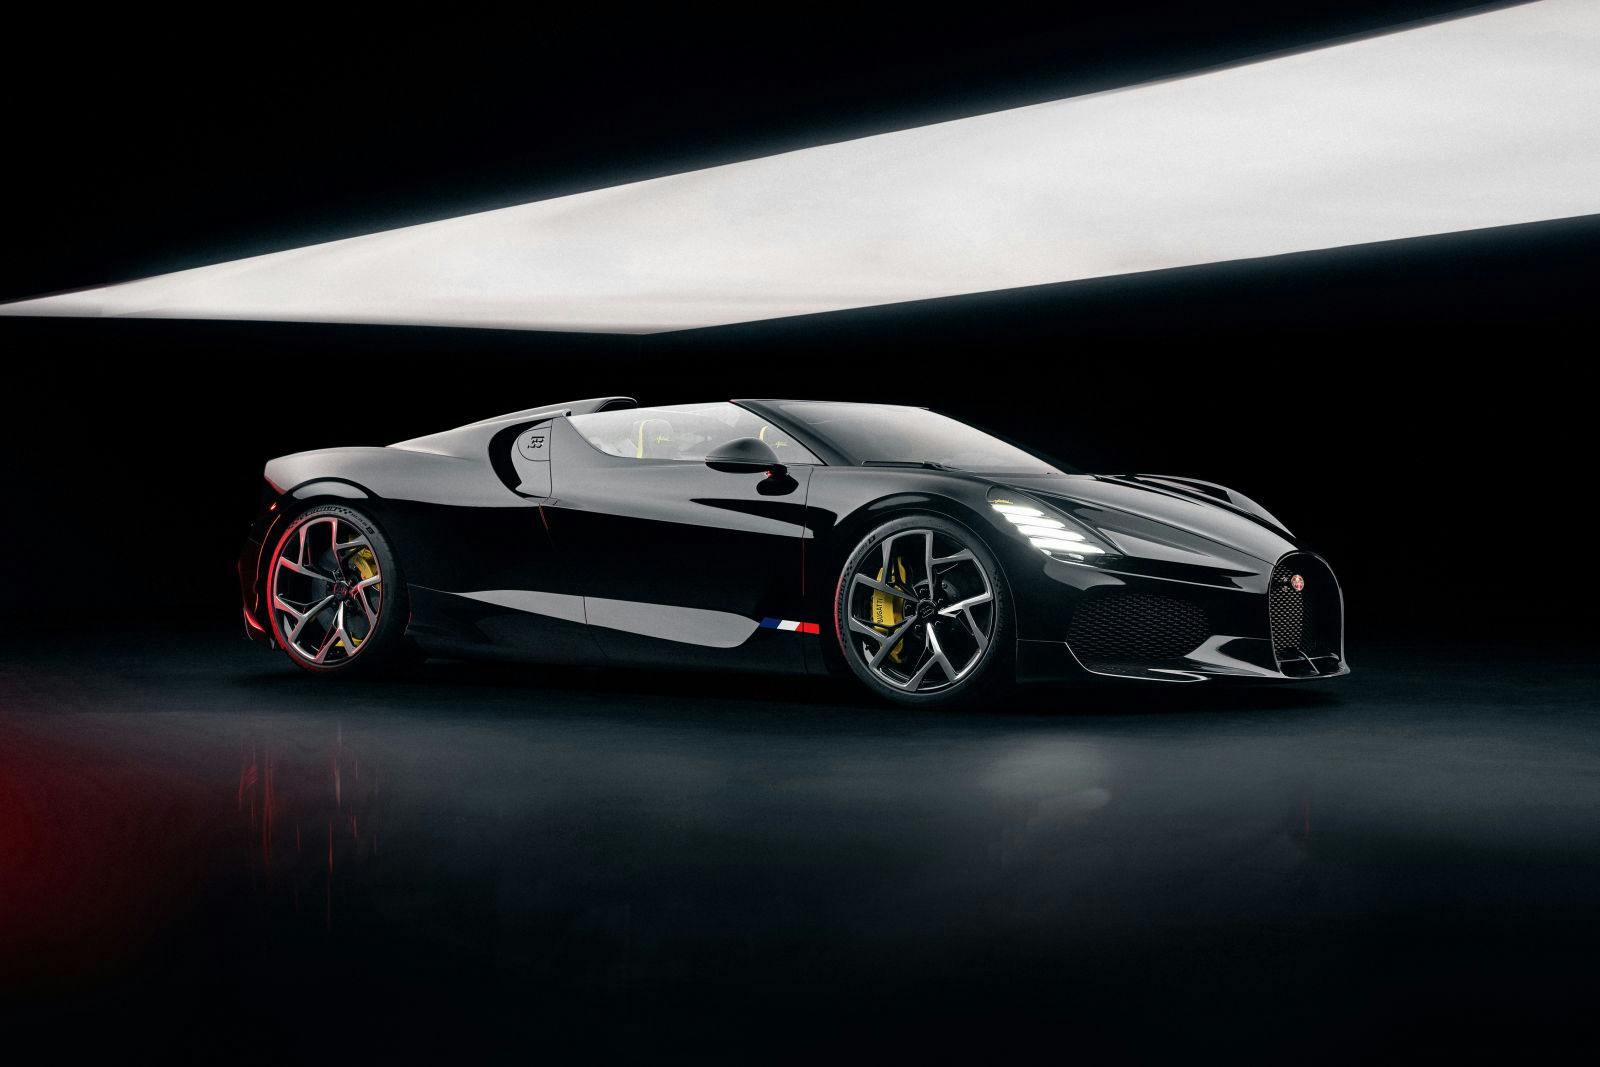 The Bugatti W16 Mistral was unveiled in August 2022 during Monterey Car Week.
